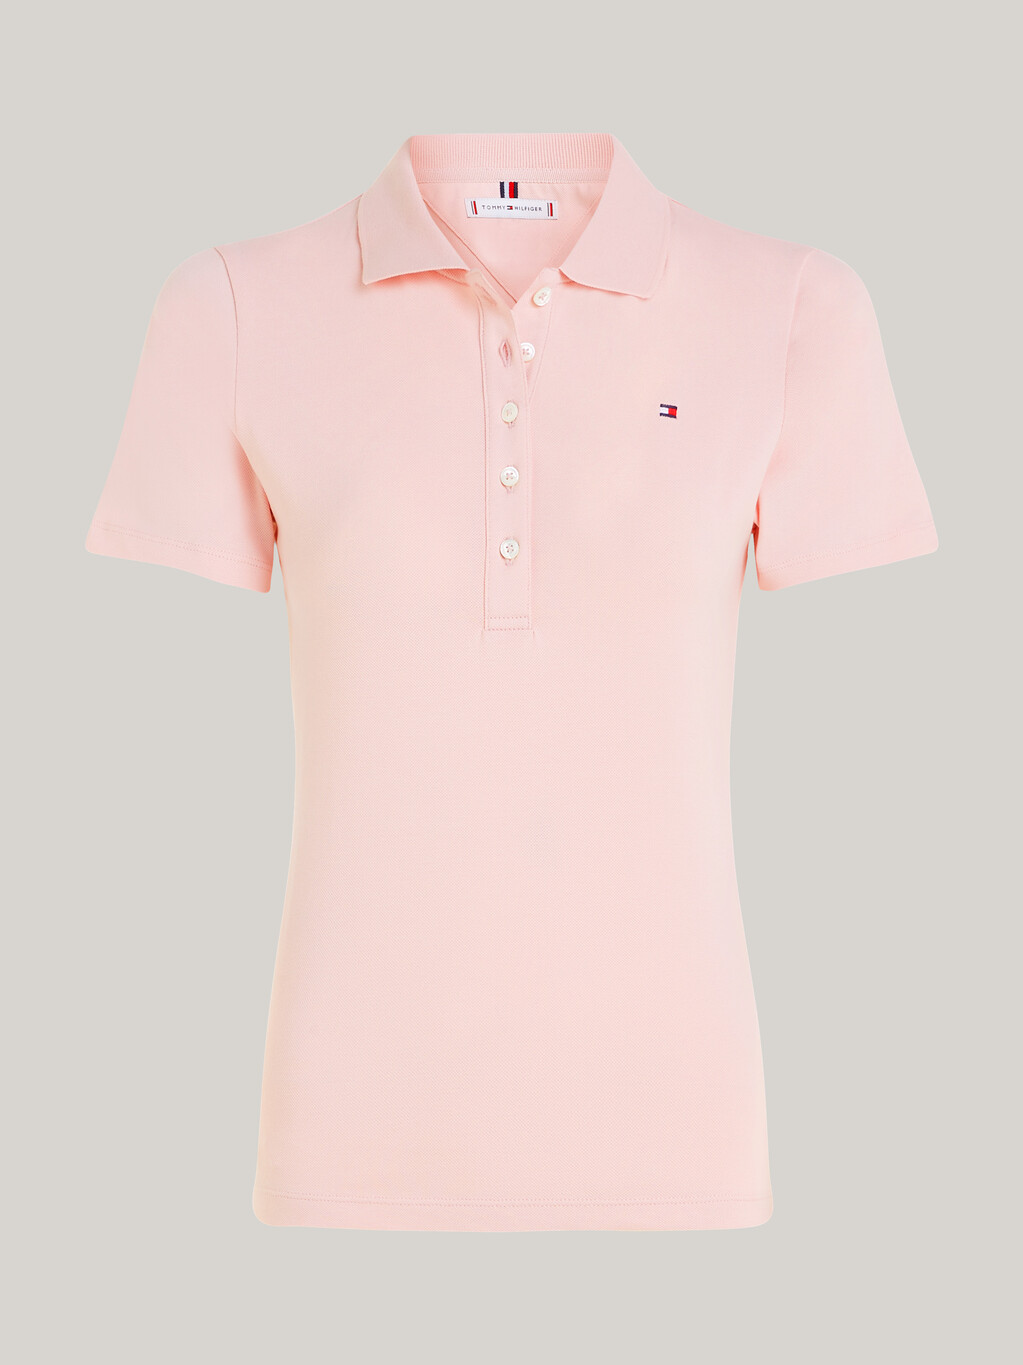 1985 Collection Slim Fit Malaysia Hilfiger Tommy | | Polo pink